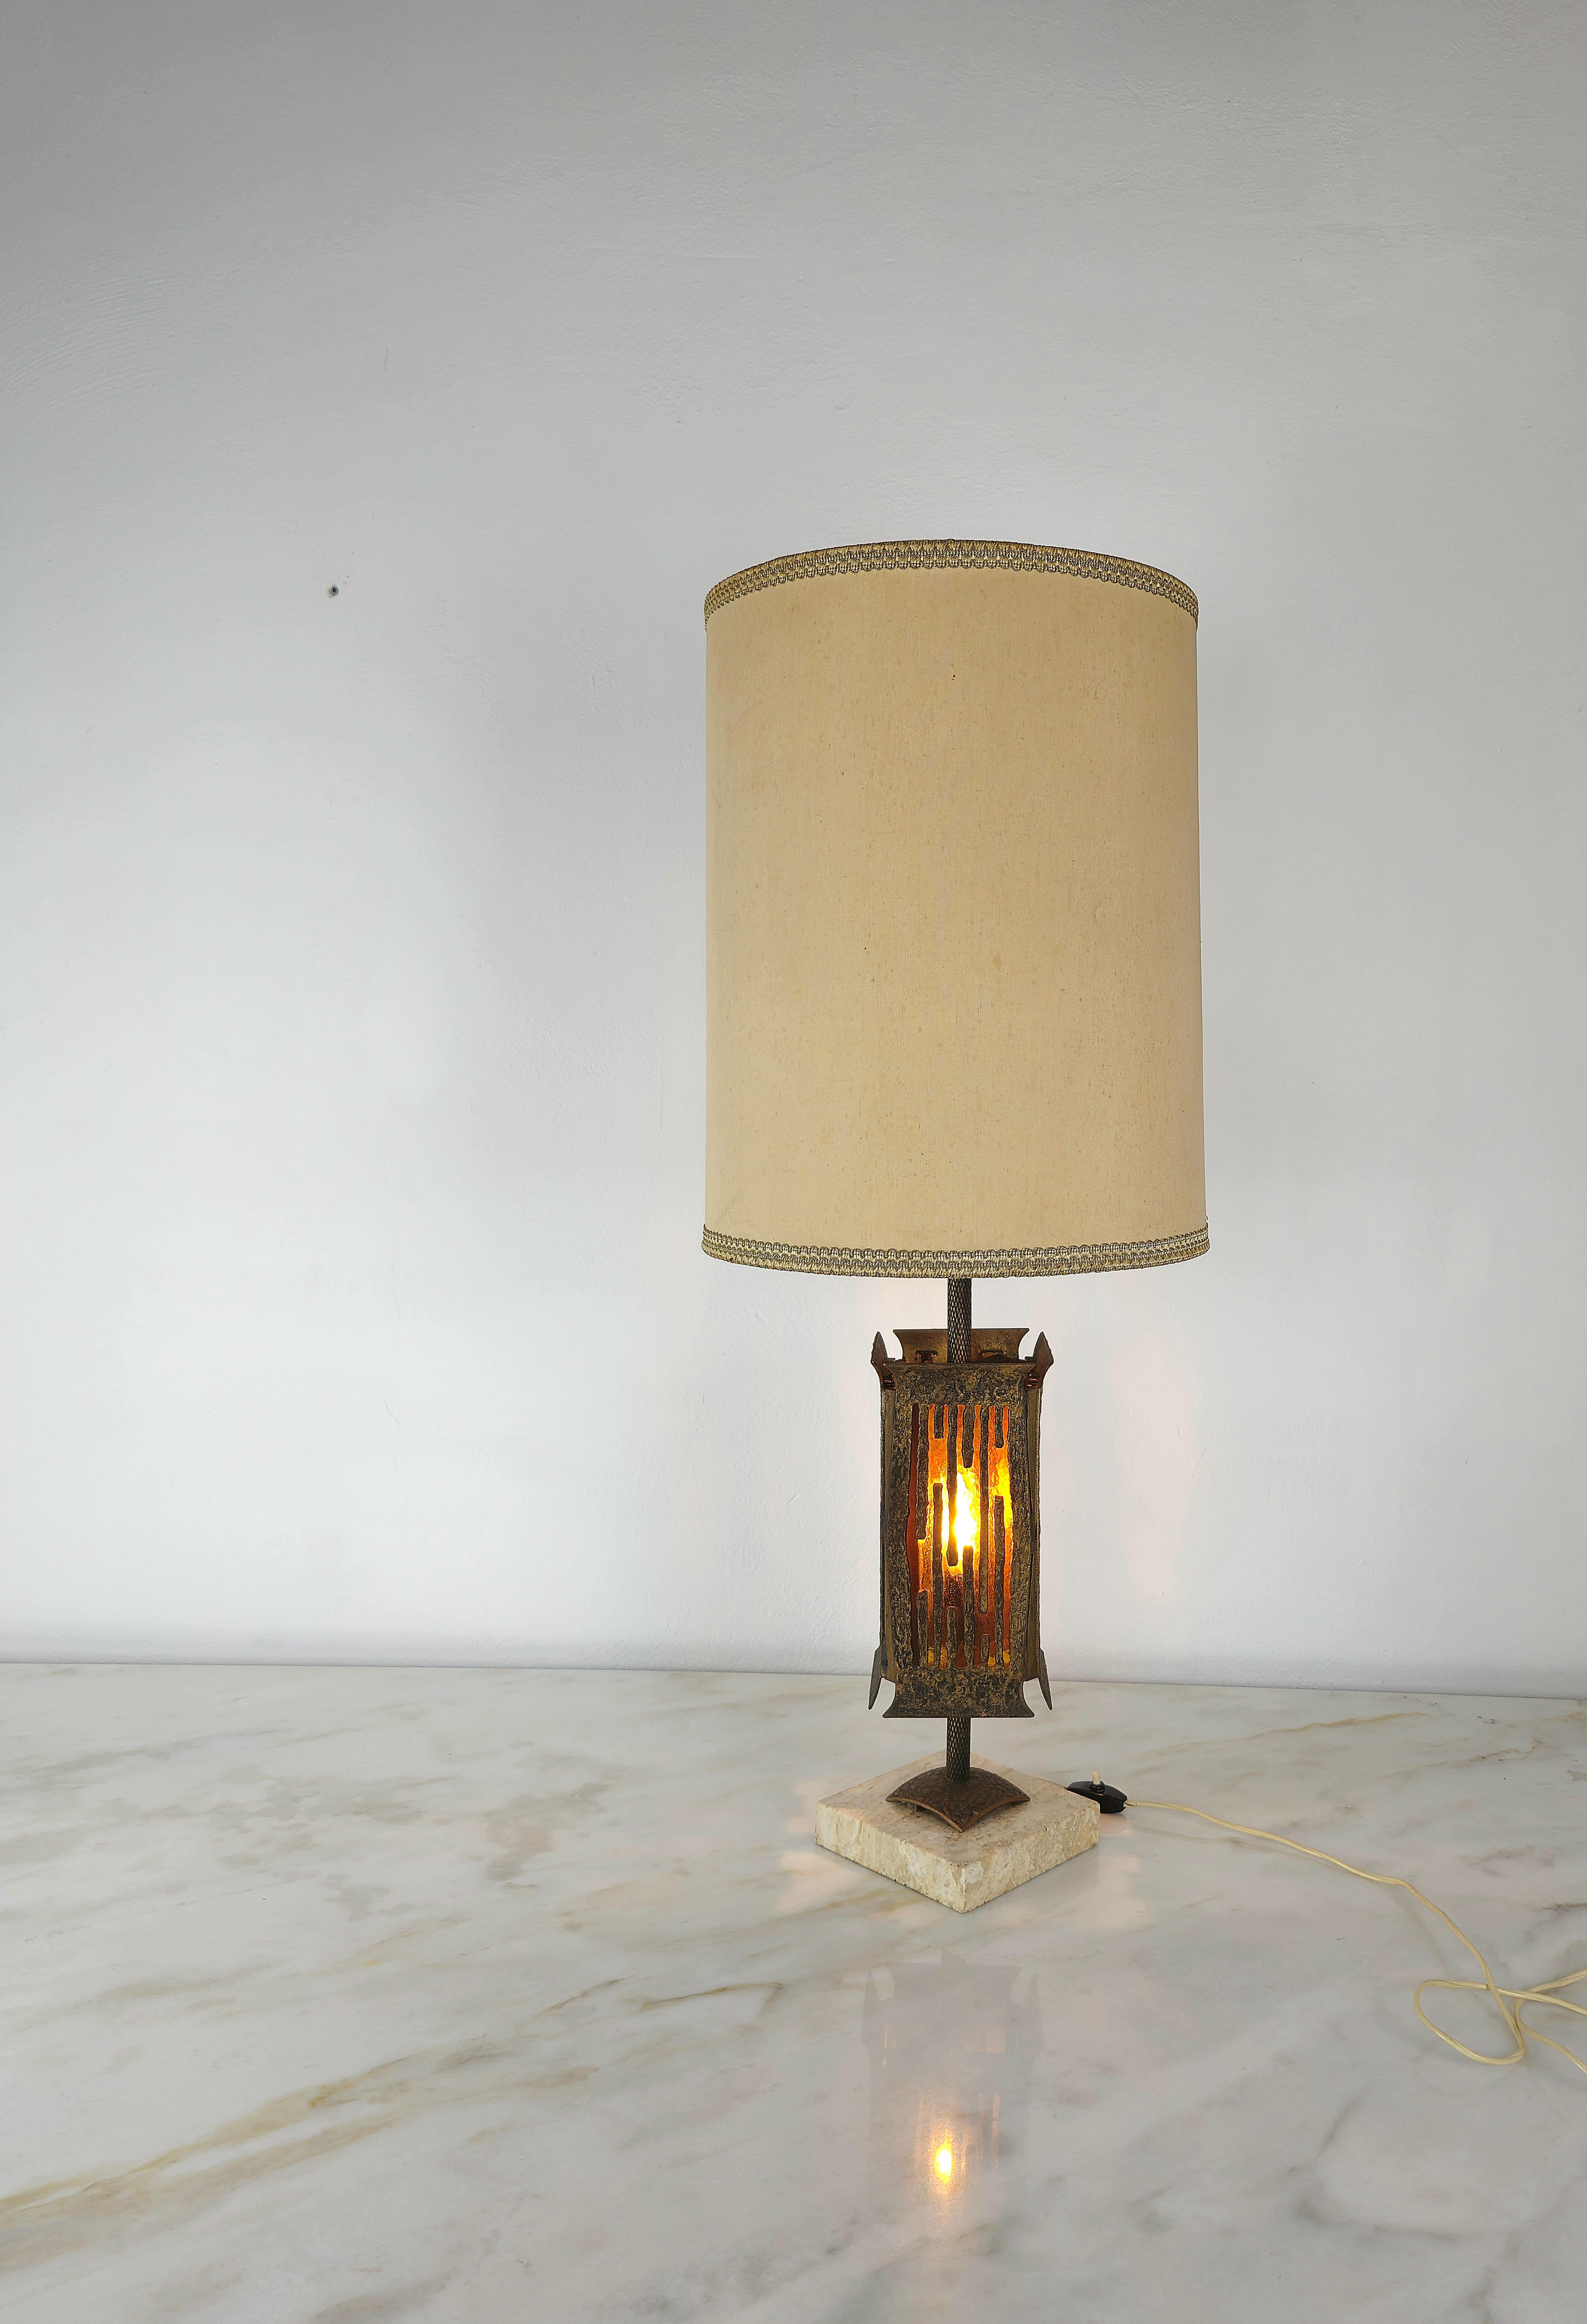 20th Century Table Lamp Brutalist Albano Poli for Poliarte Bronze Glass Midcentury Italy 1970 For Sale